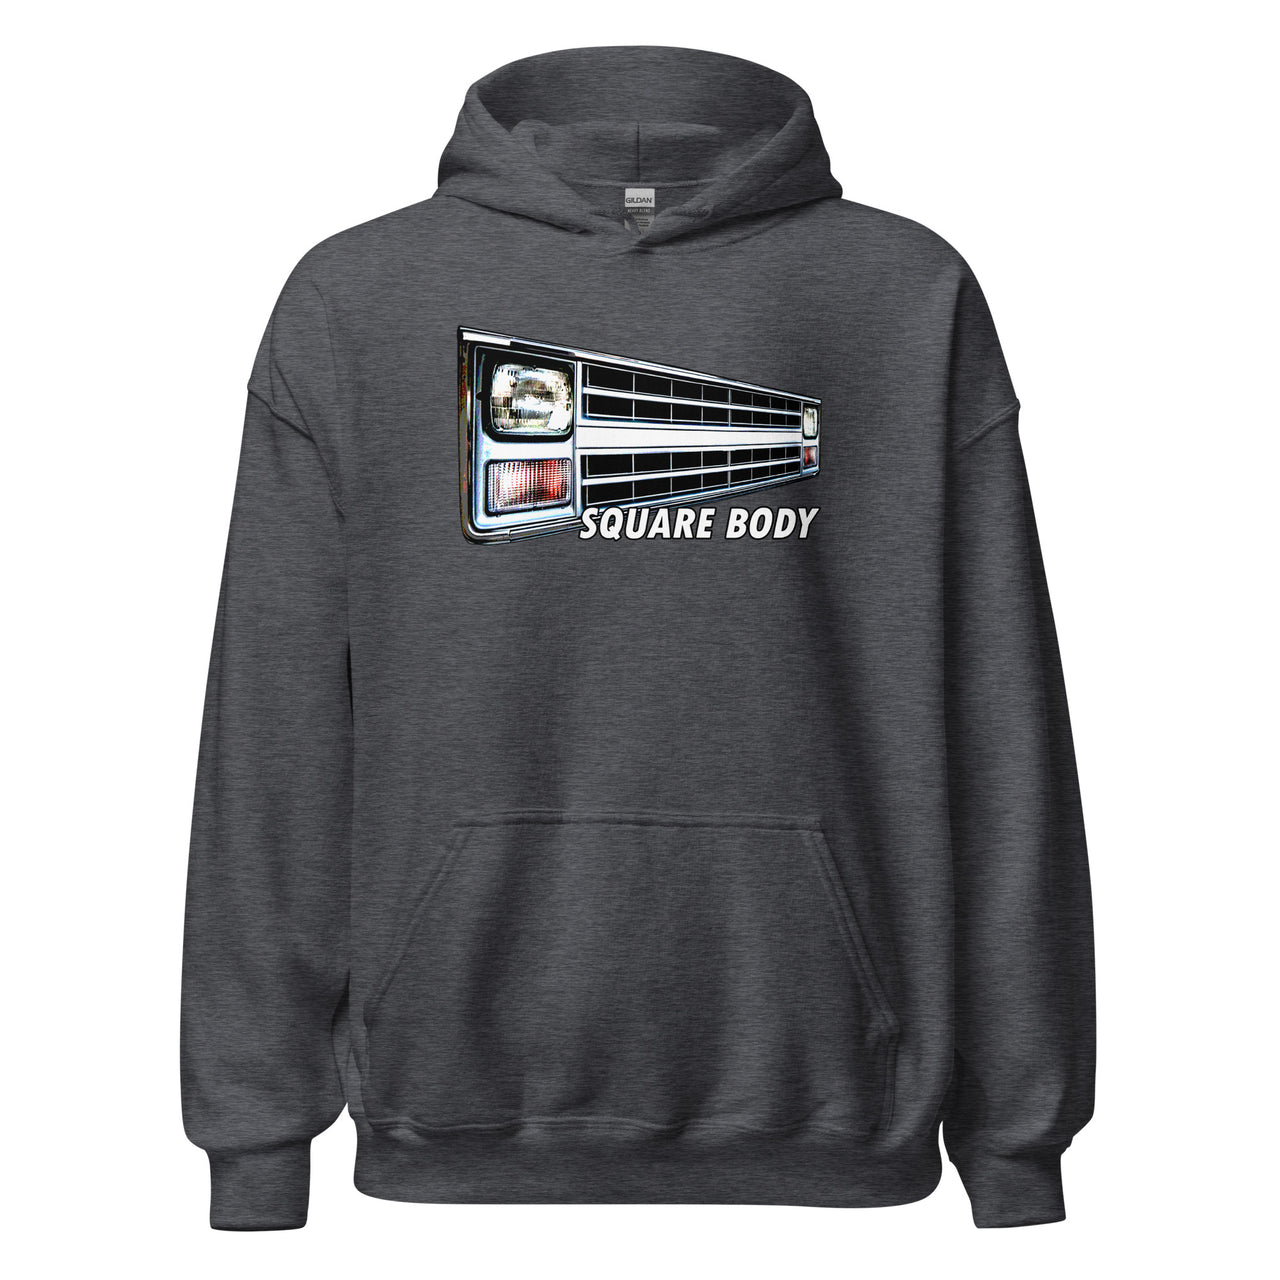 Square Body Truck 80s Angled Grille Hoodie in grey